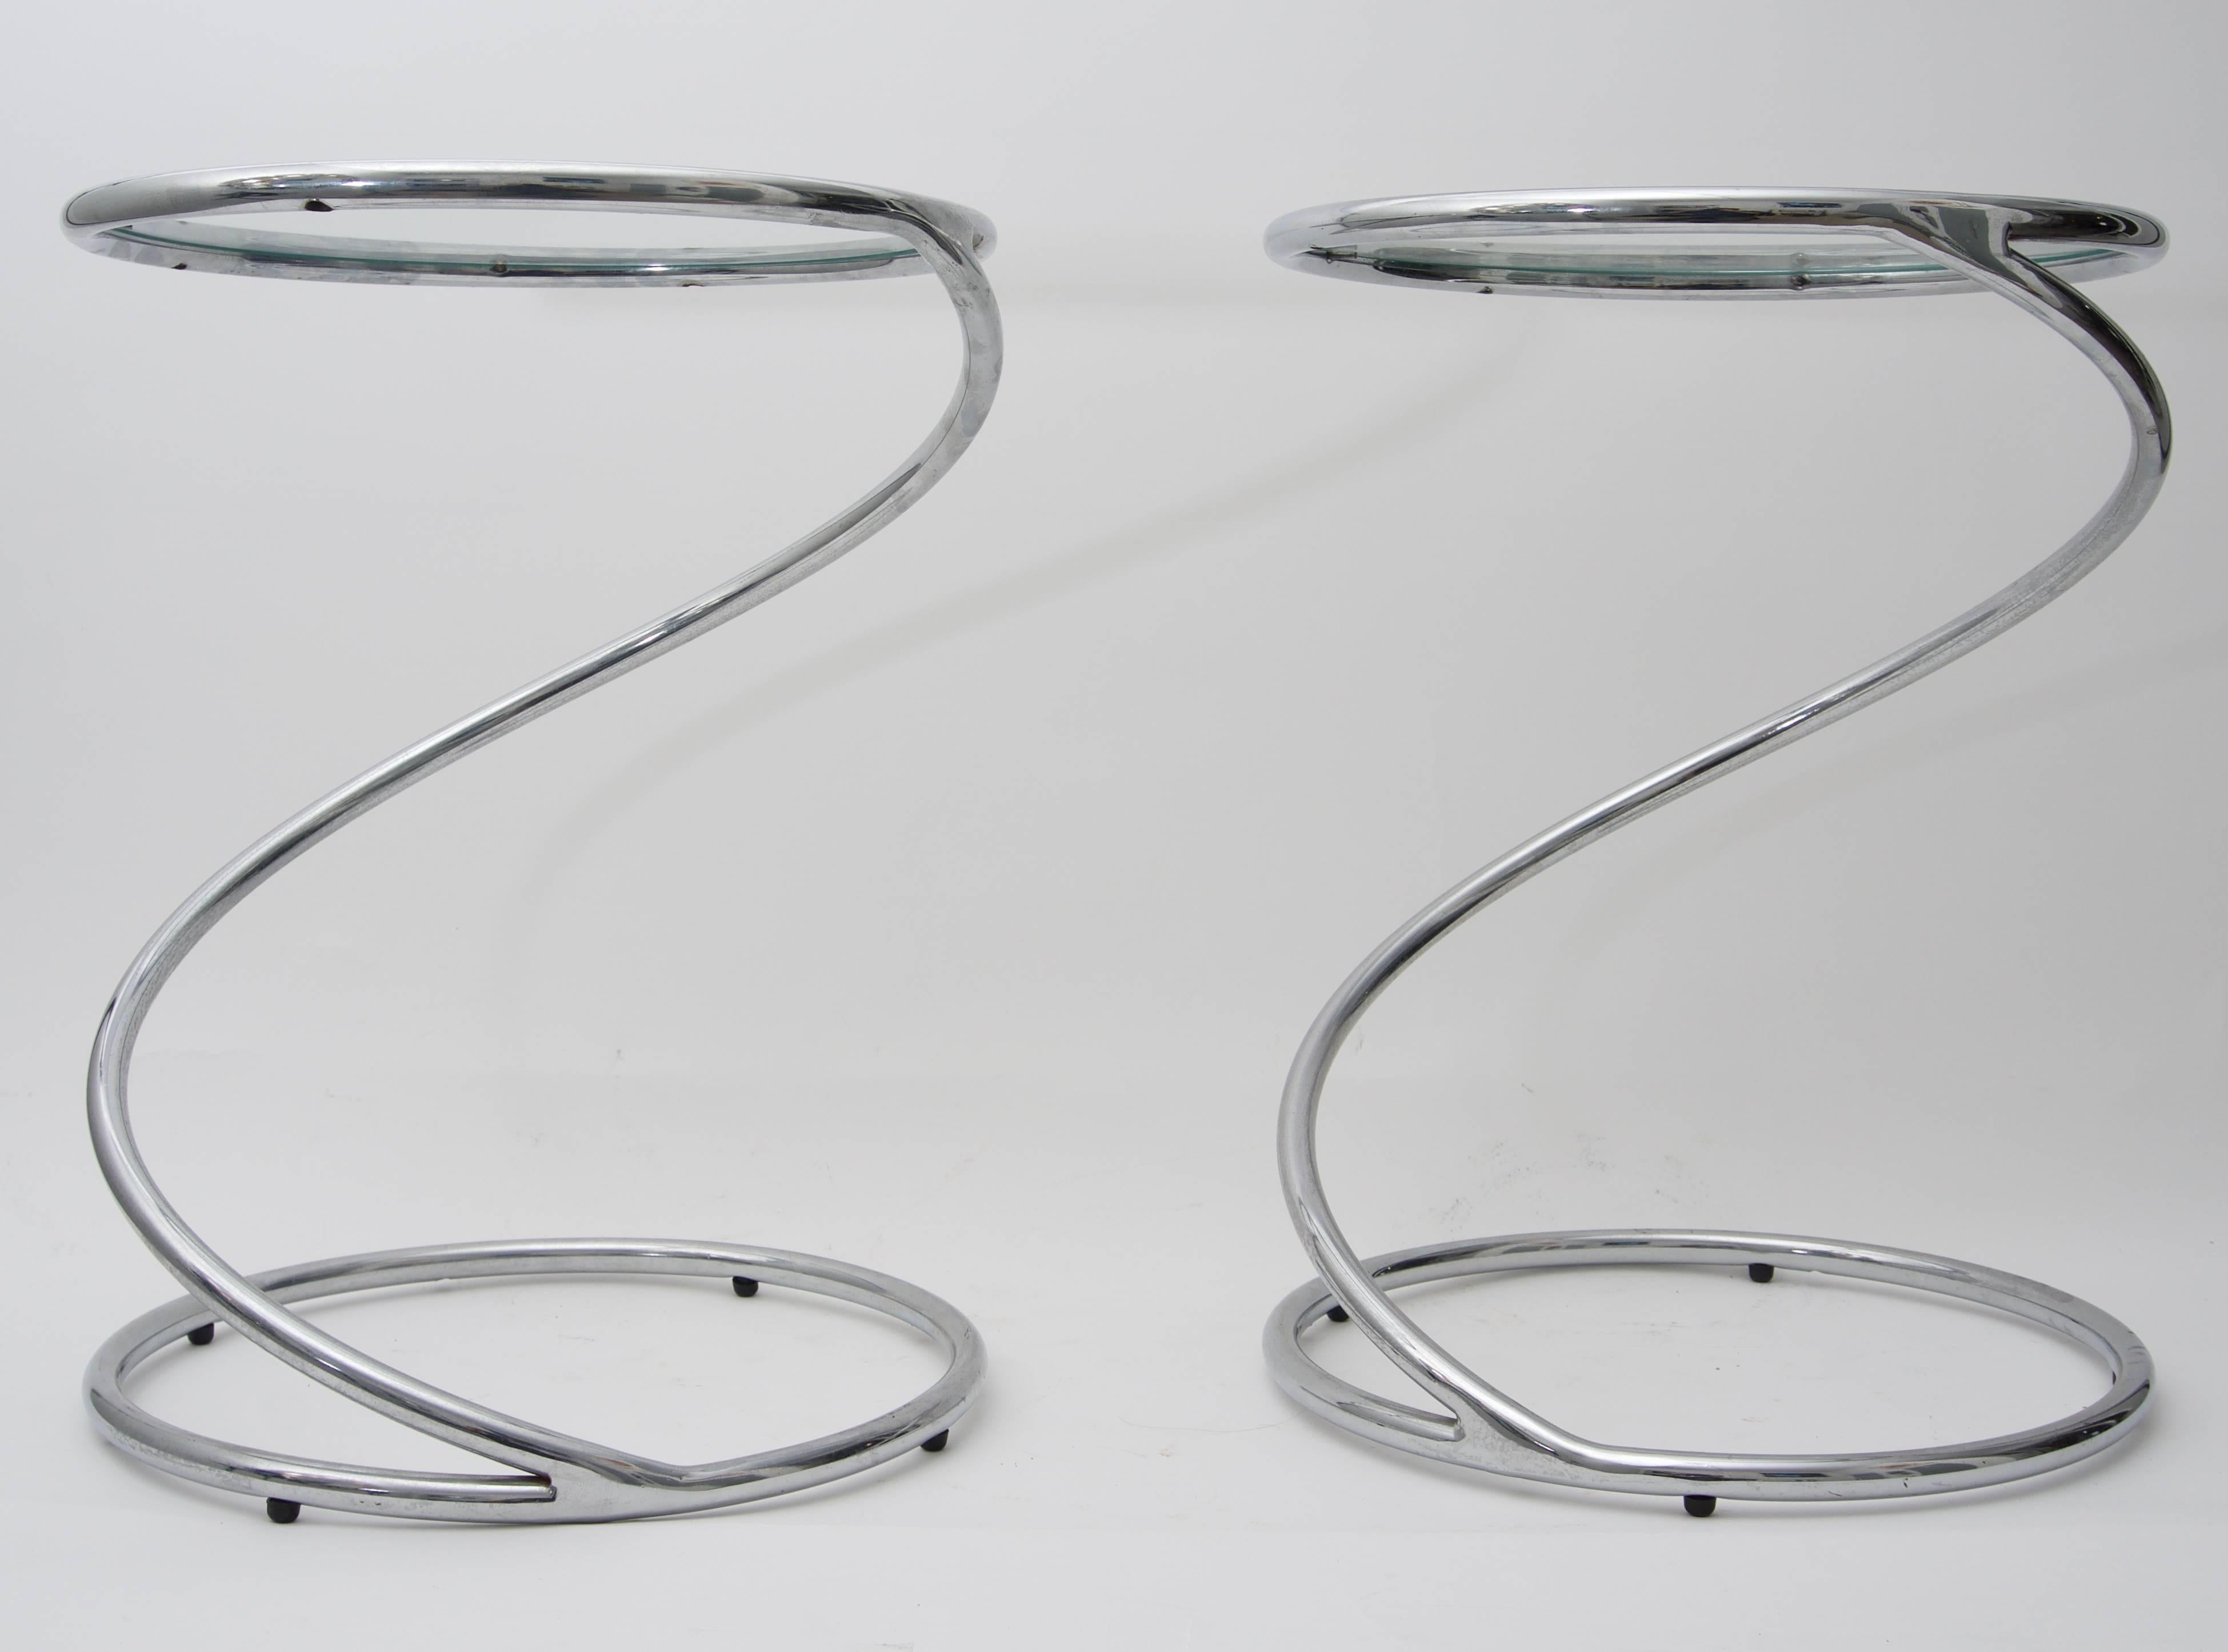 This stylish pair of side tables were created by Leon Rosen for Pace Furniture and date to the 1970s.